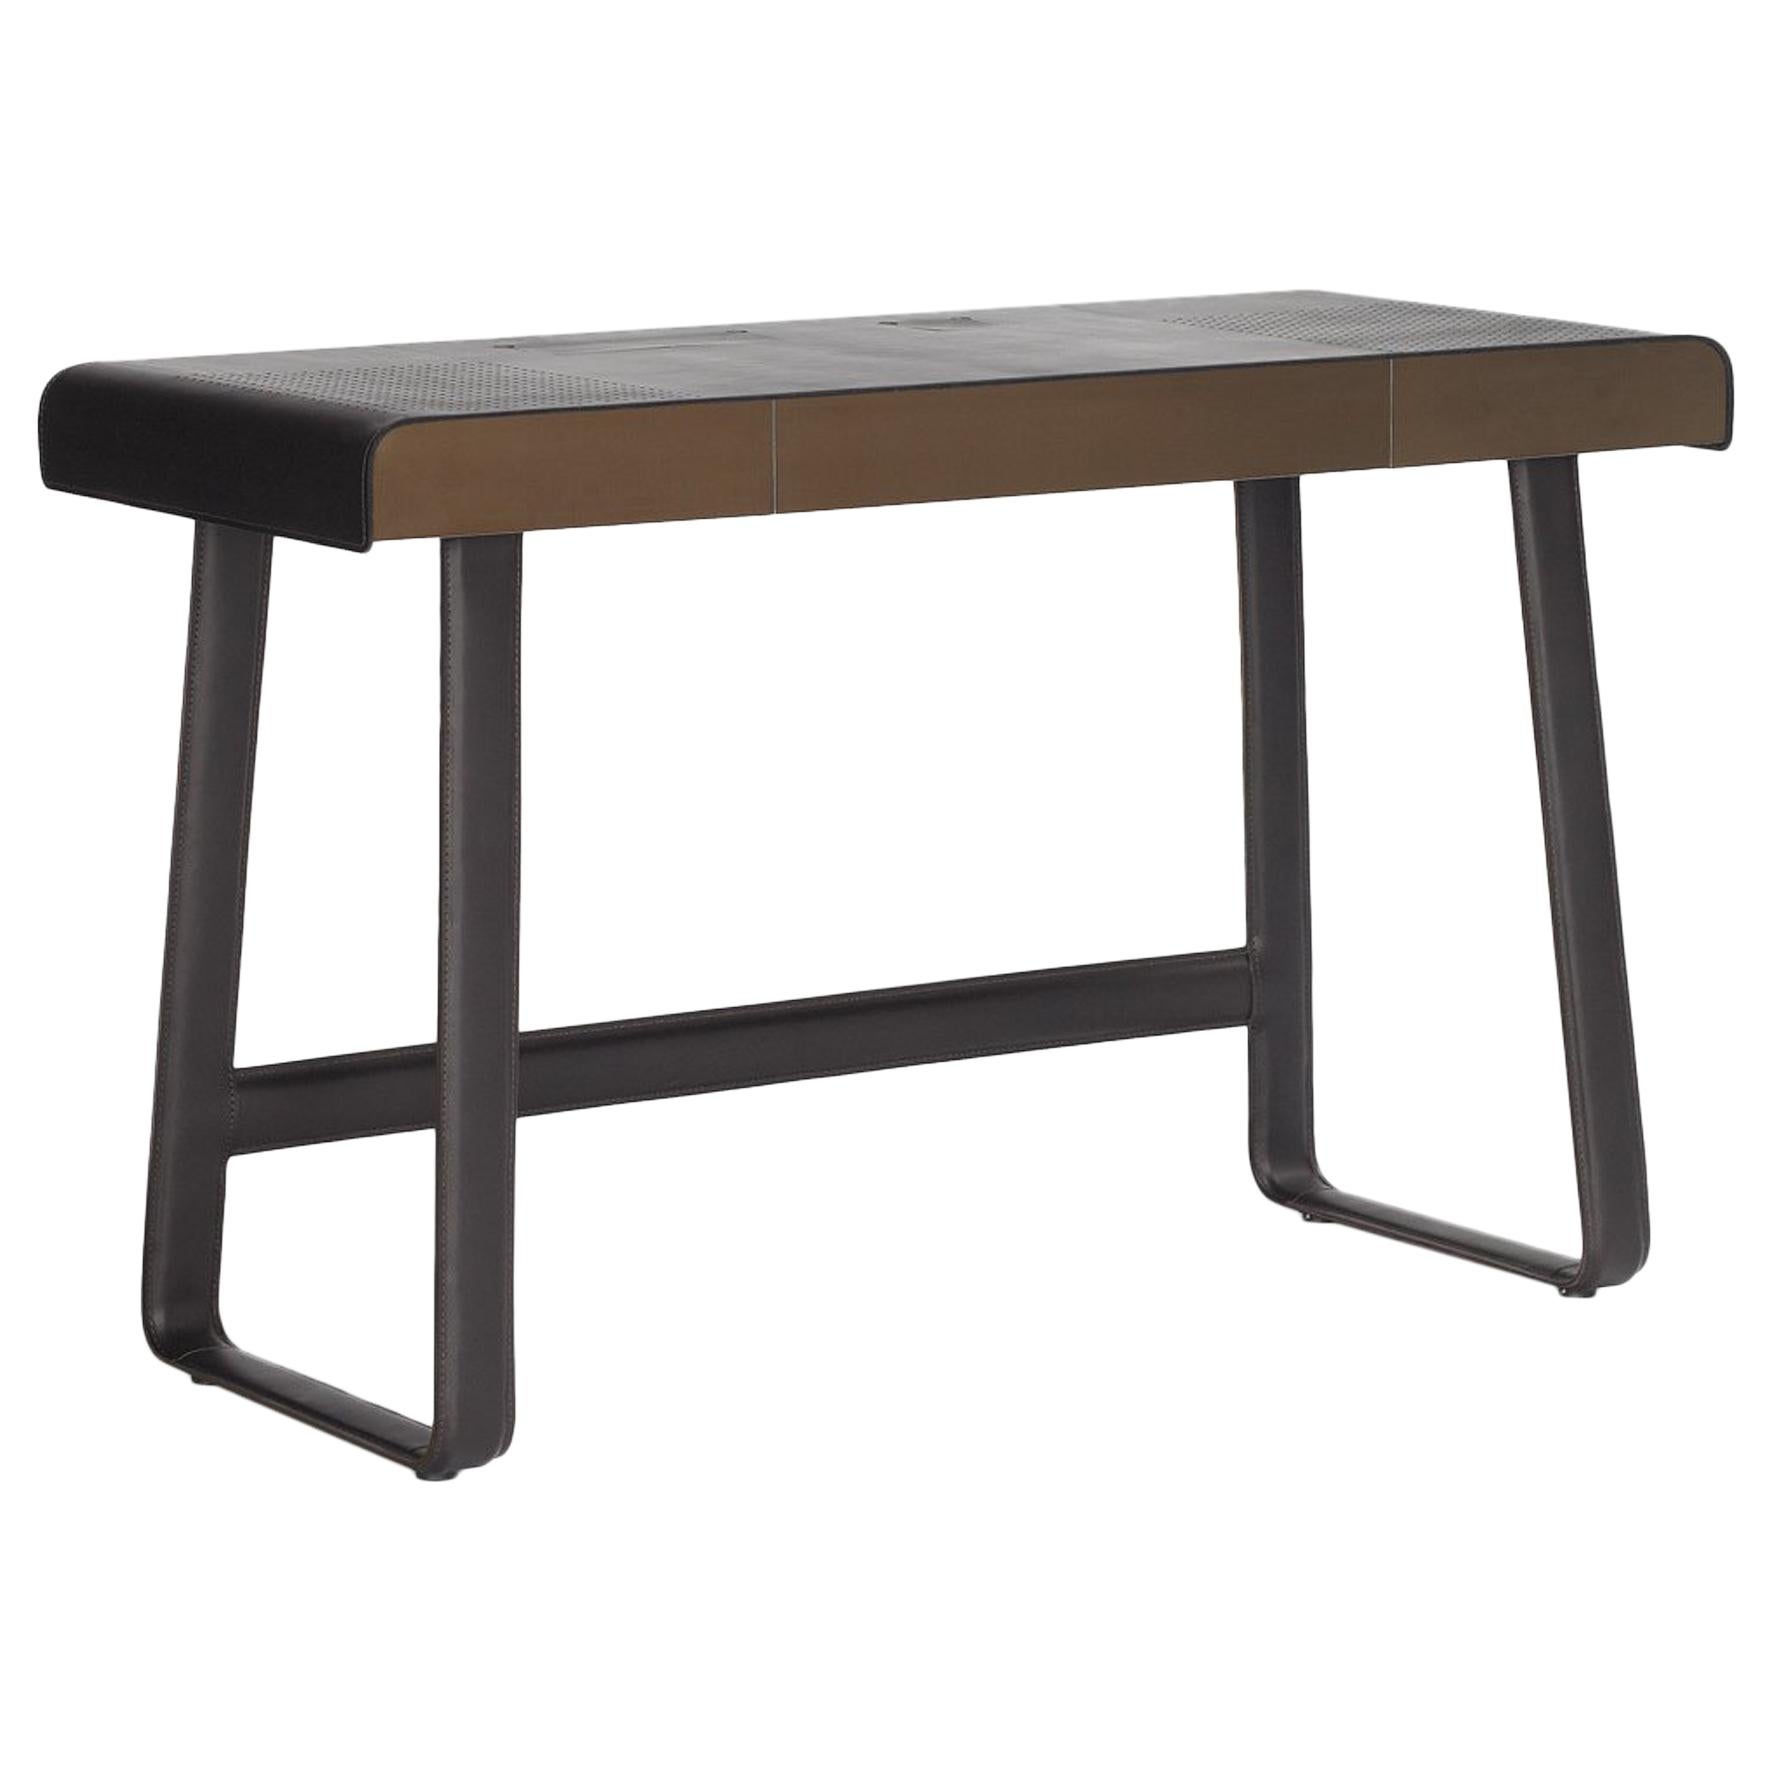 ClassiCon Pegasus Desk in Black with Leather by IF Group & Tilla Goldberg